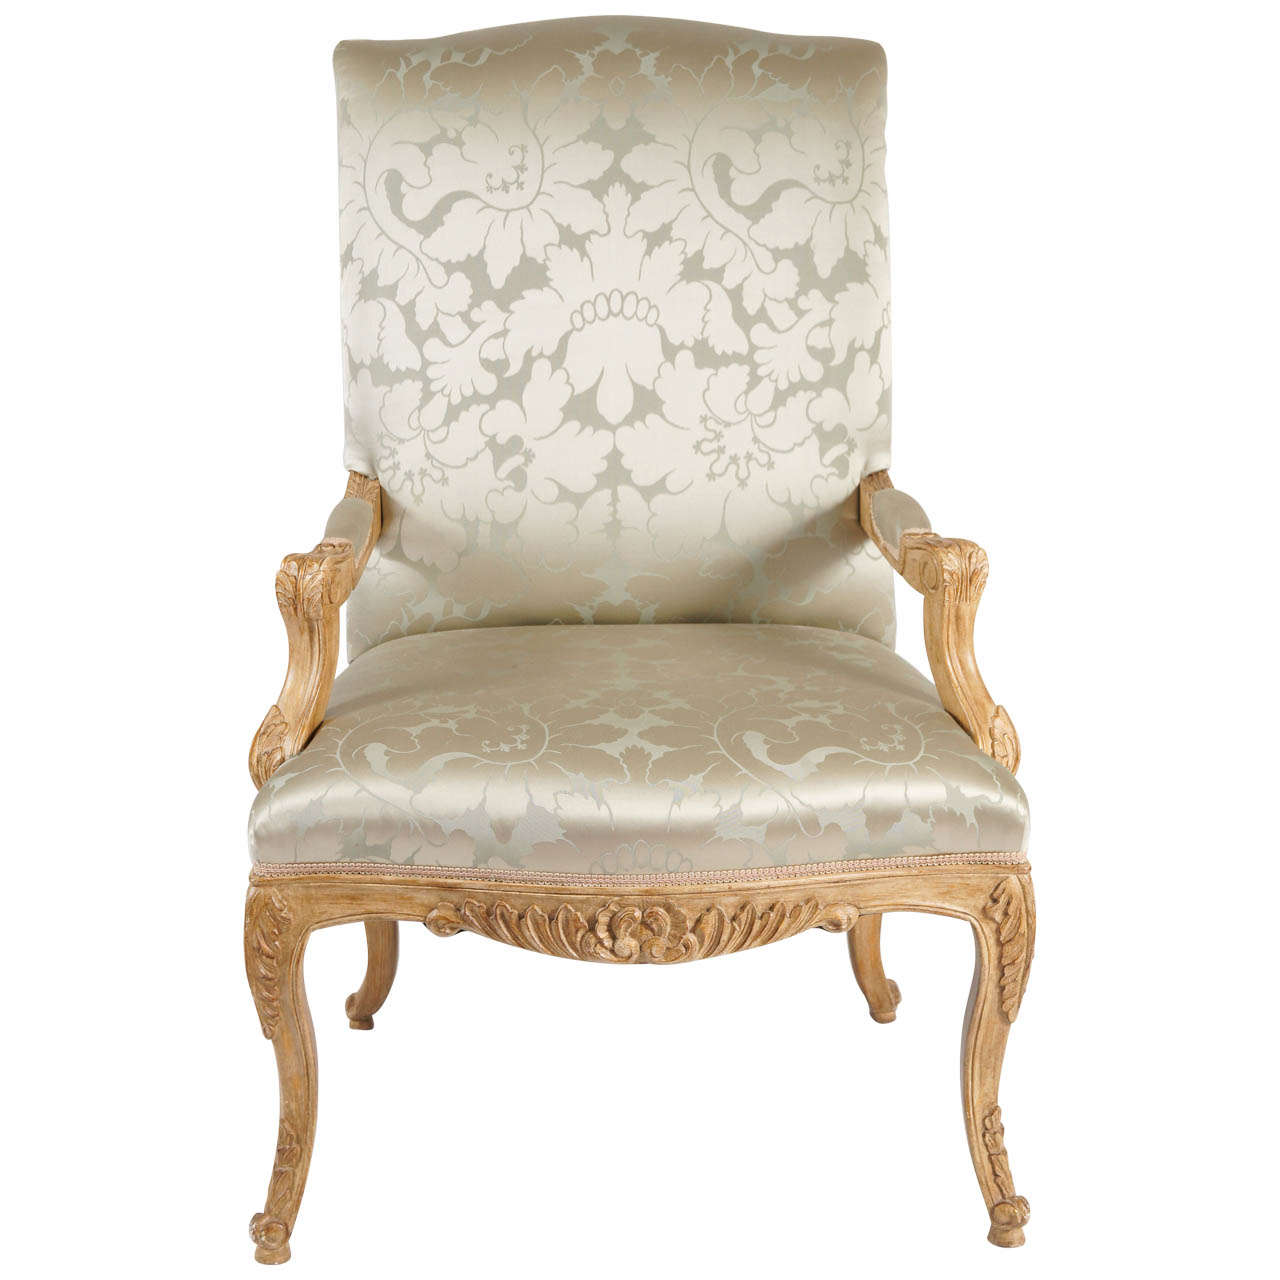 Louis XIV style Throne chair with silk damask upholster with carved and faux painted frame.